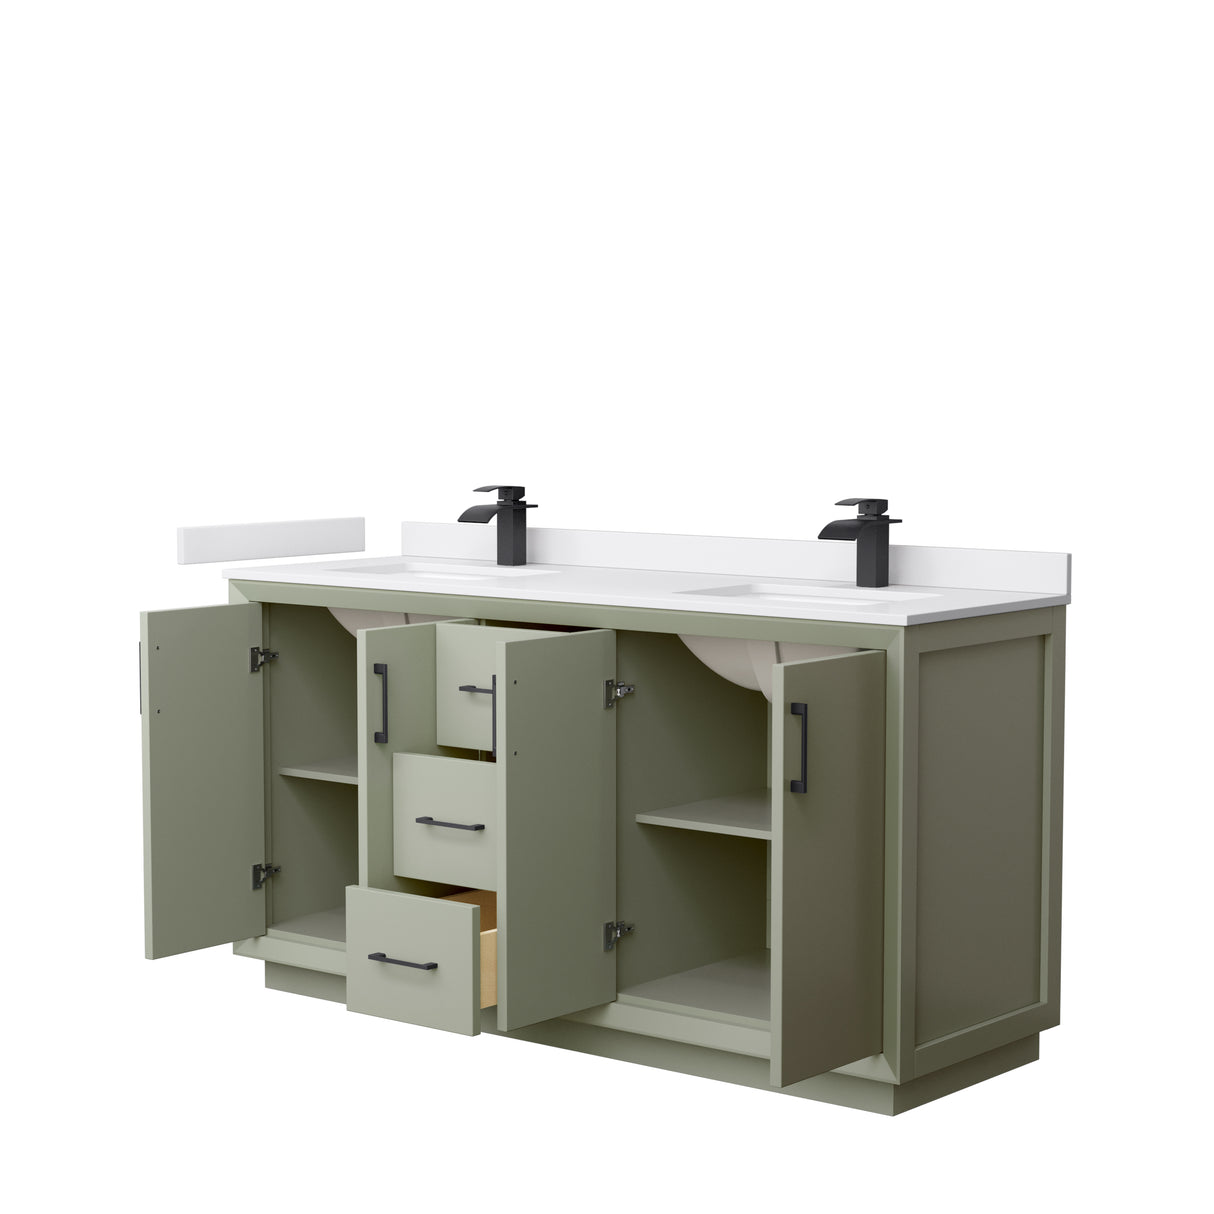 Strada 66 Inch Double Bathroom Vanity in Light Green White Cultured Marble Countertop Undermount Square Sinks Matte Black Trim